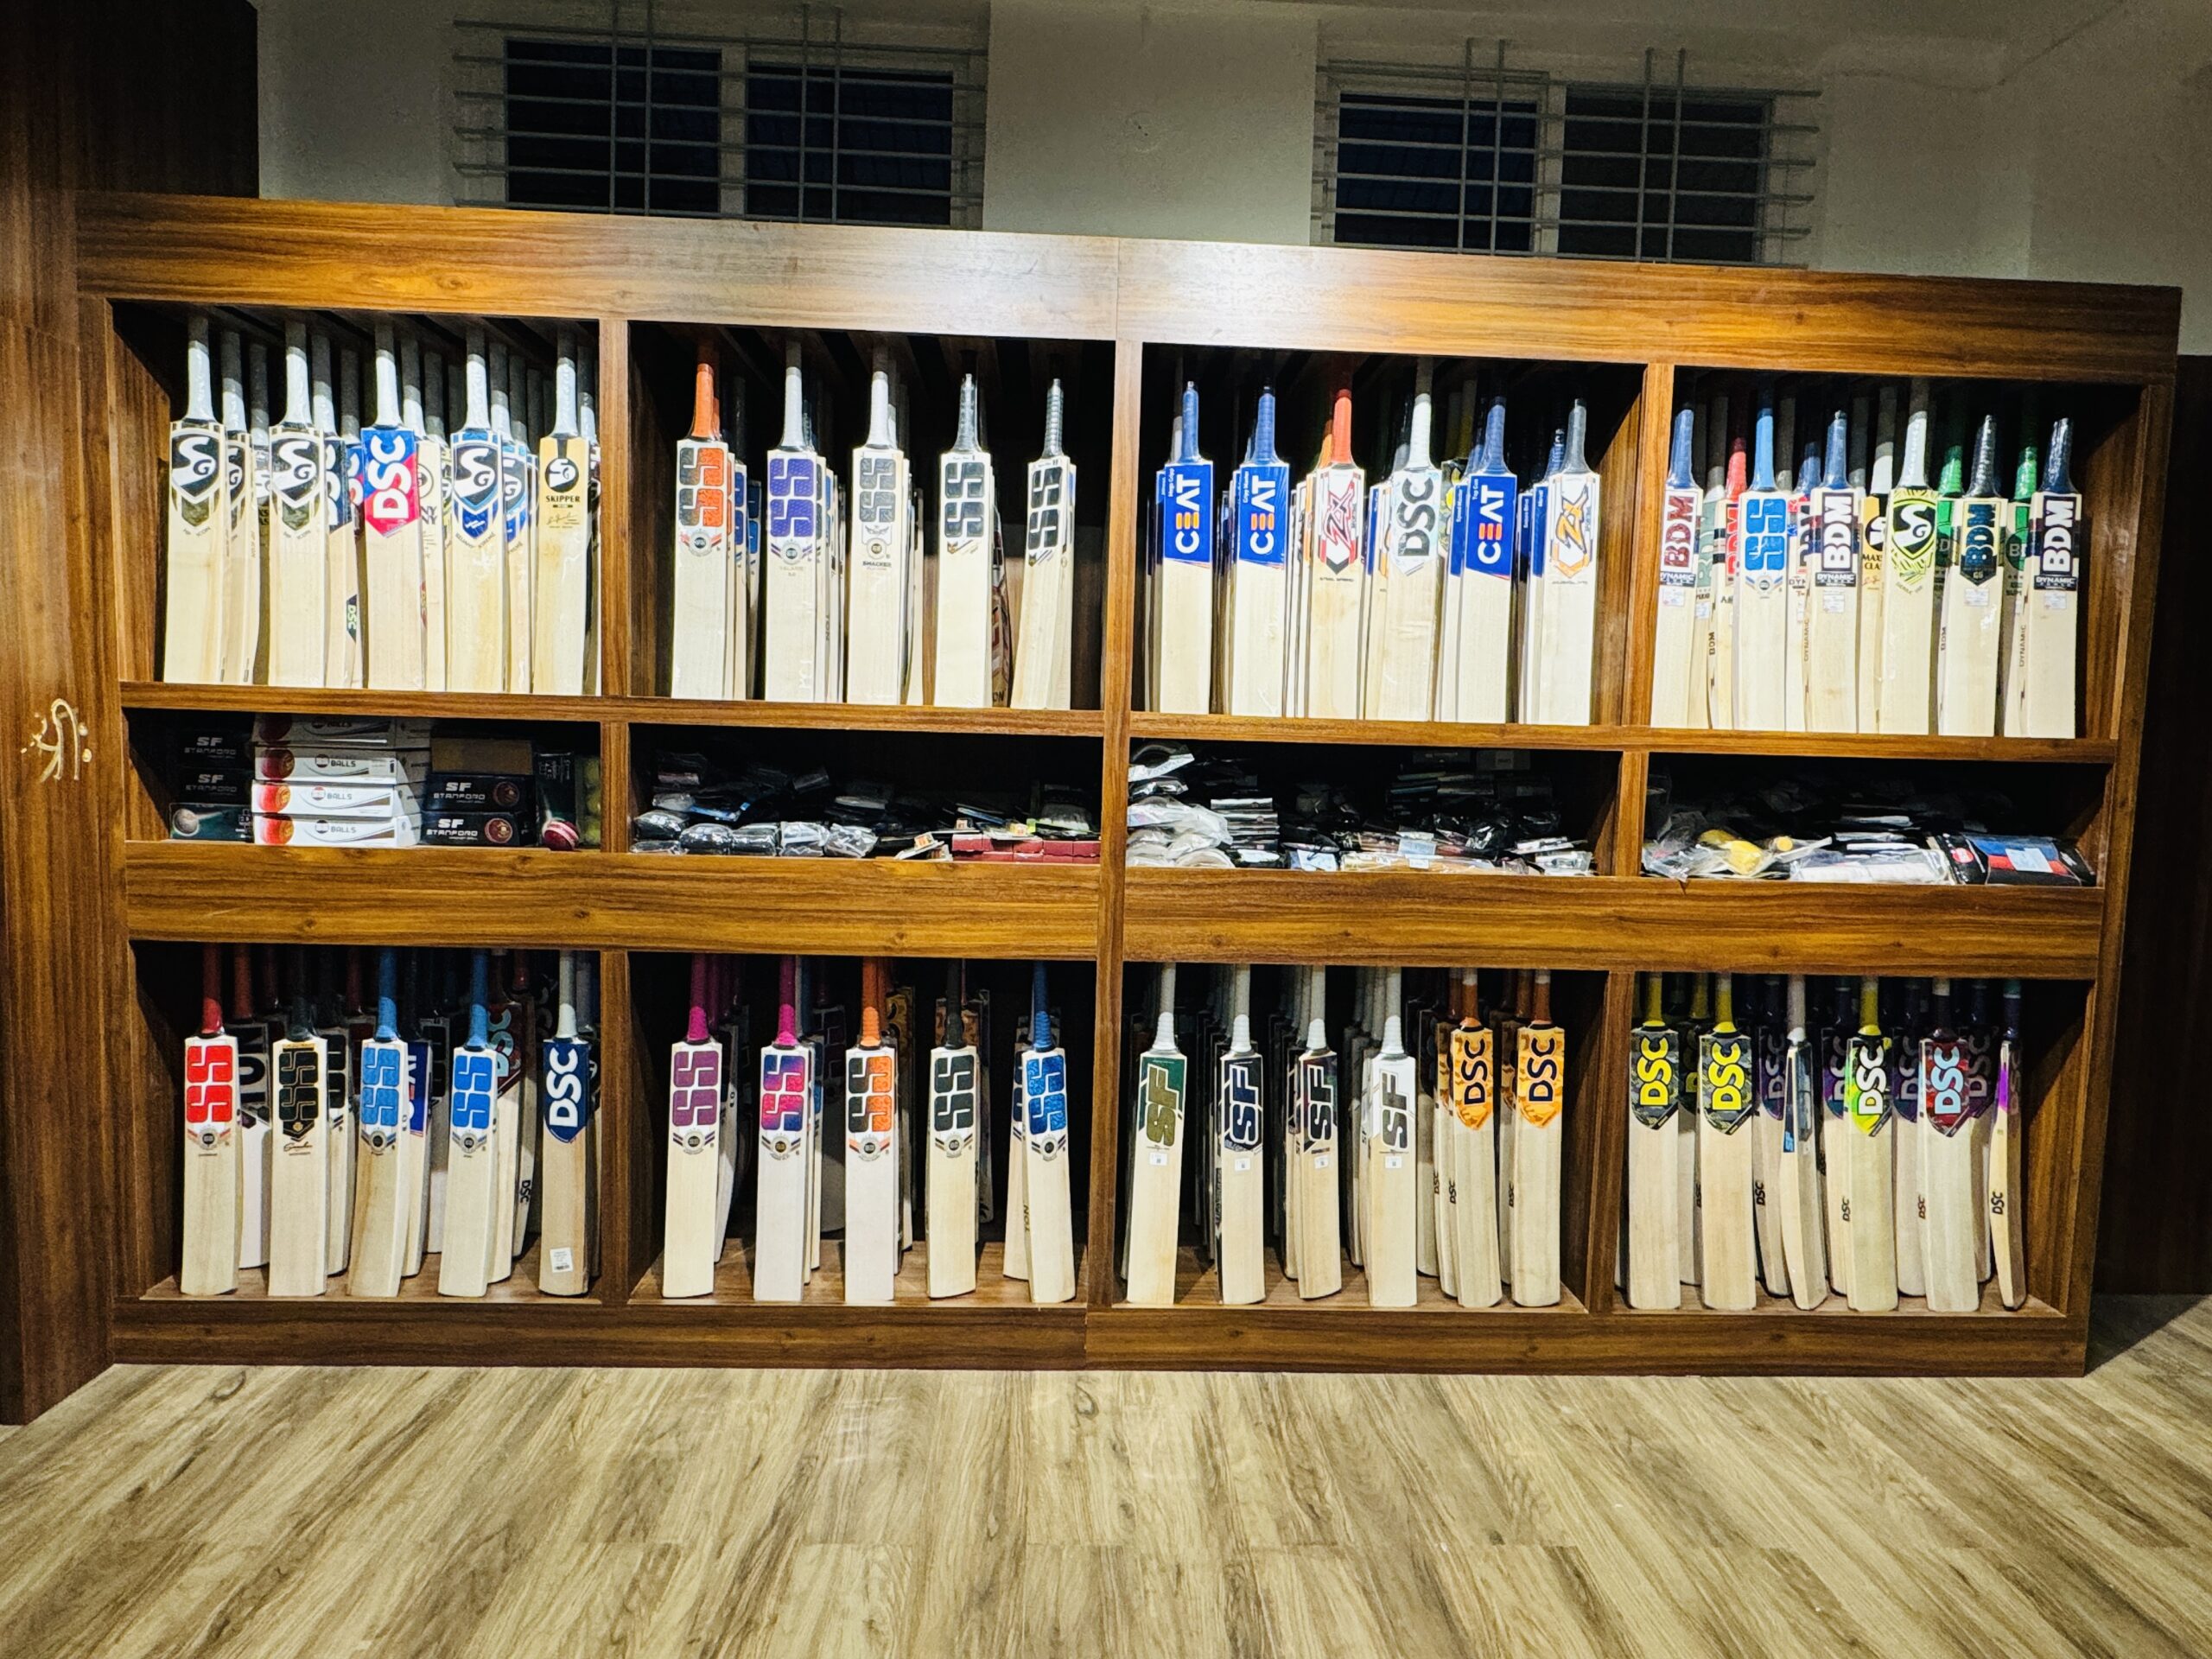 Countryman Cricket - A State of the Art Cricket Shop in Bengaluru!